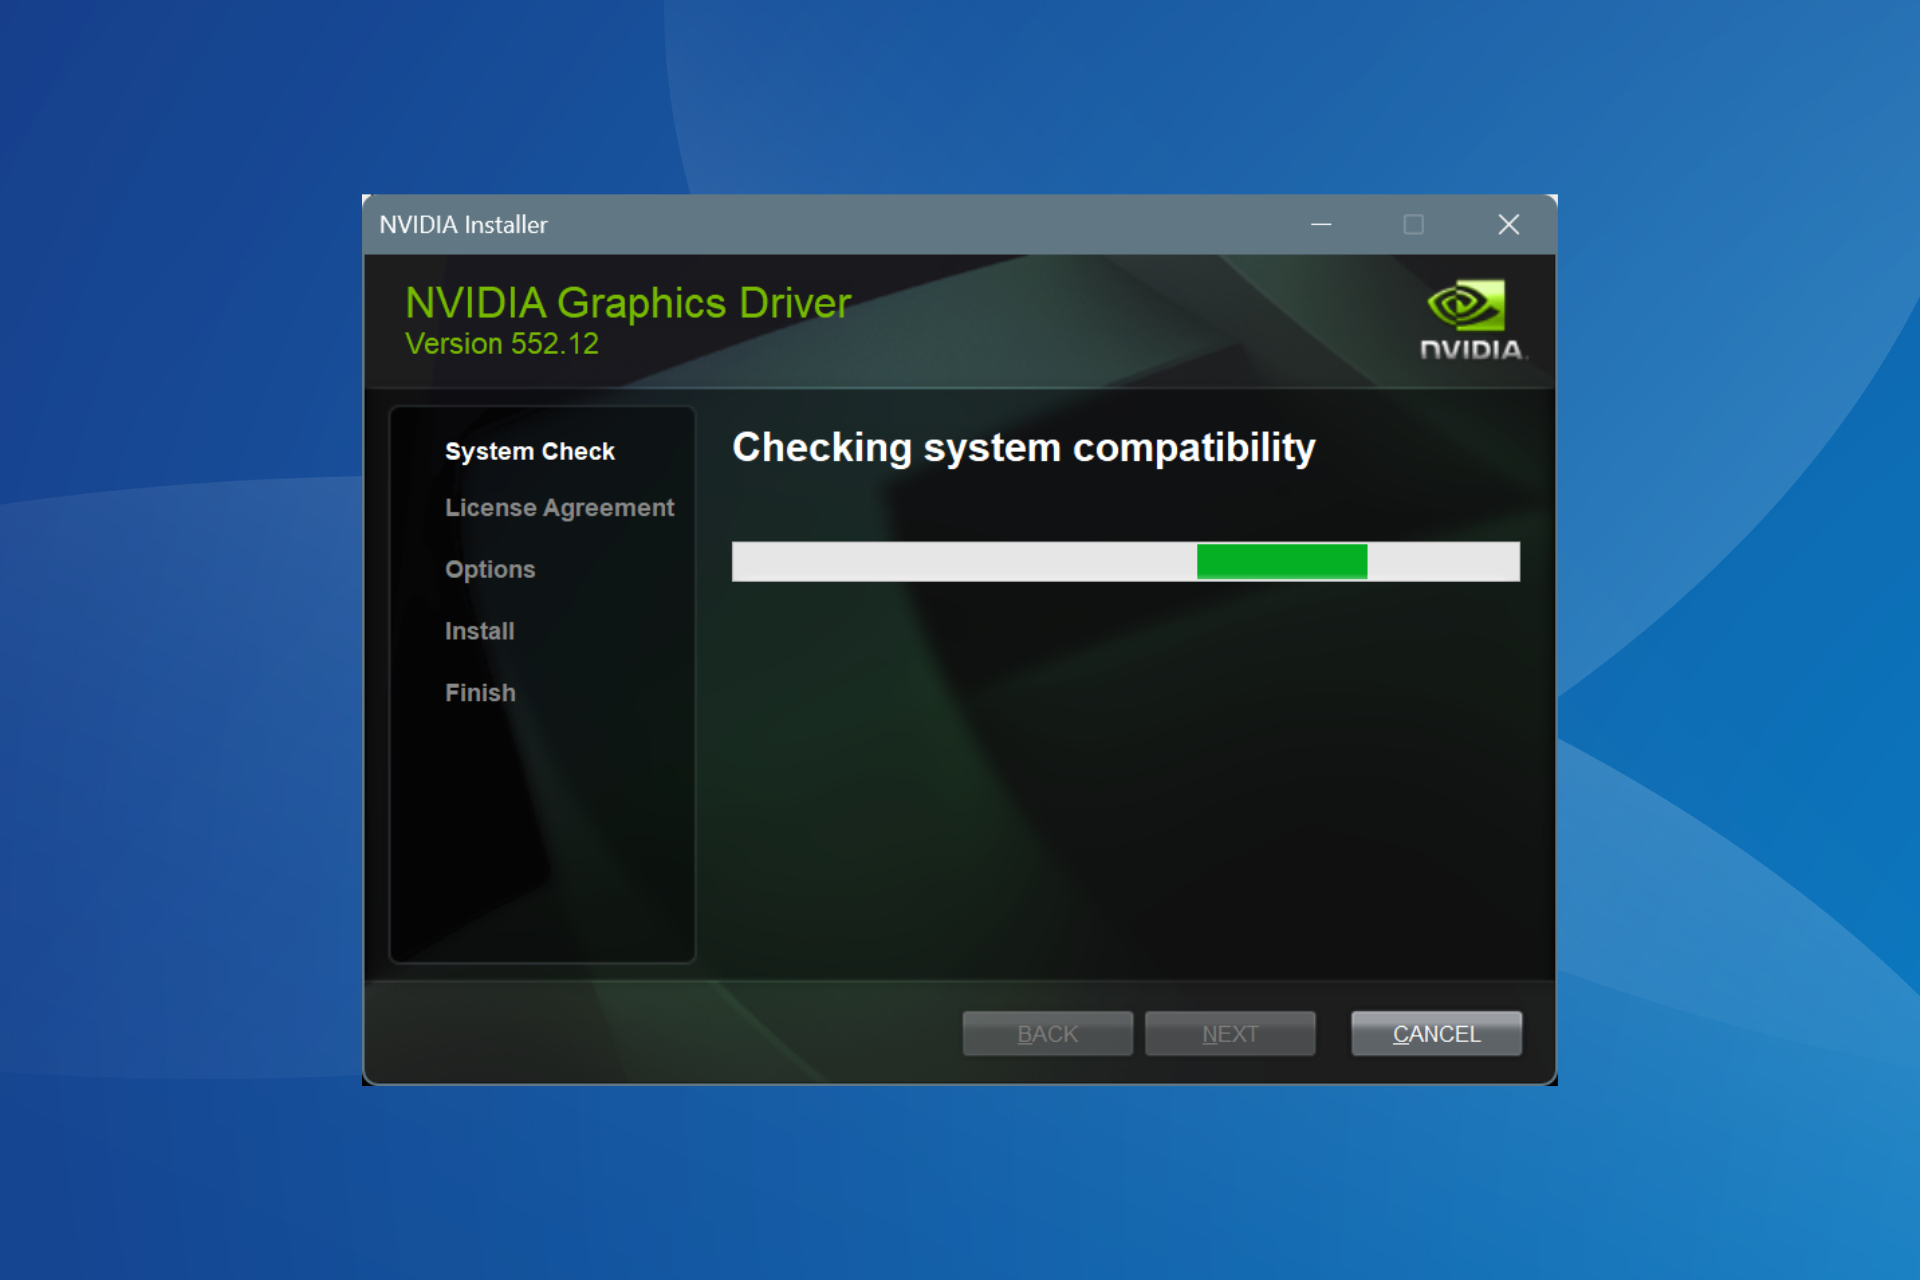 Latest NVIDIA Game Ready Driver 552.12 still doesn’t support multi-monitor RTX HDR, causes black screen for a few